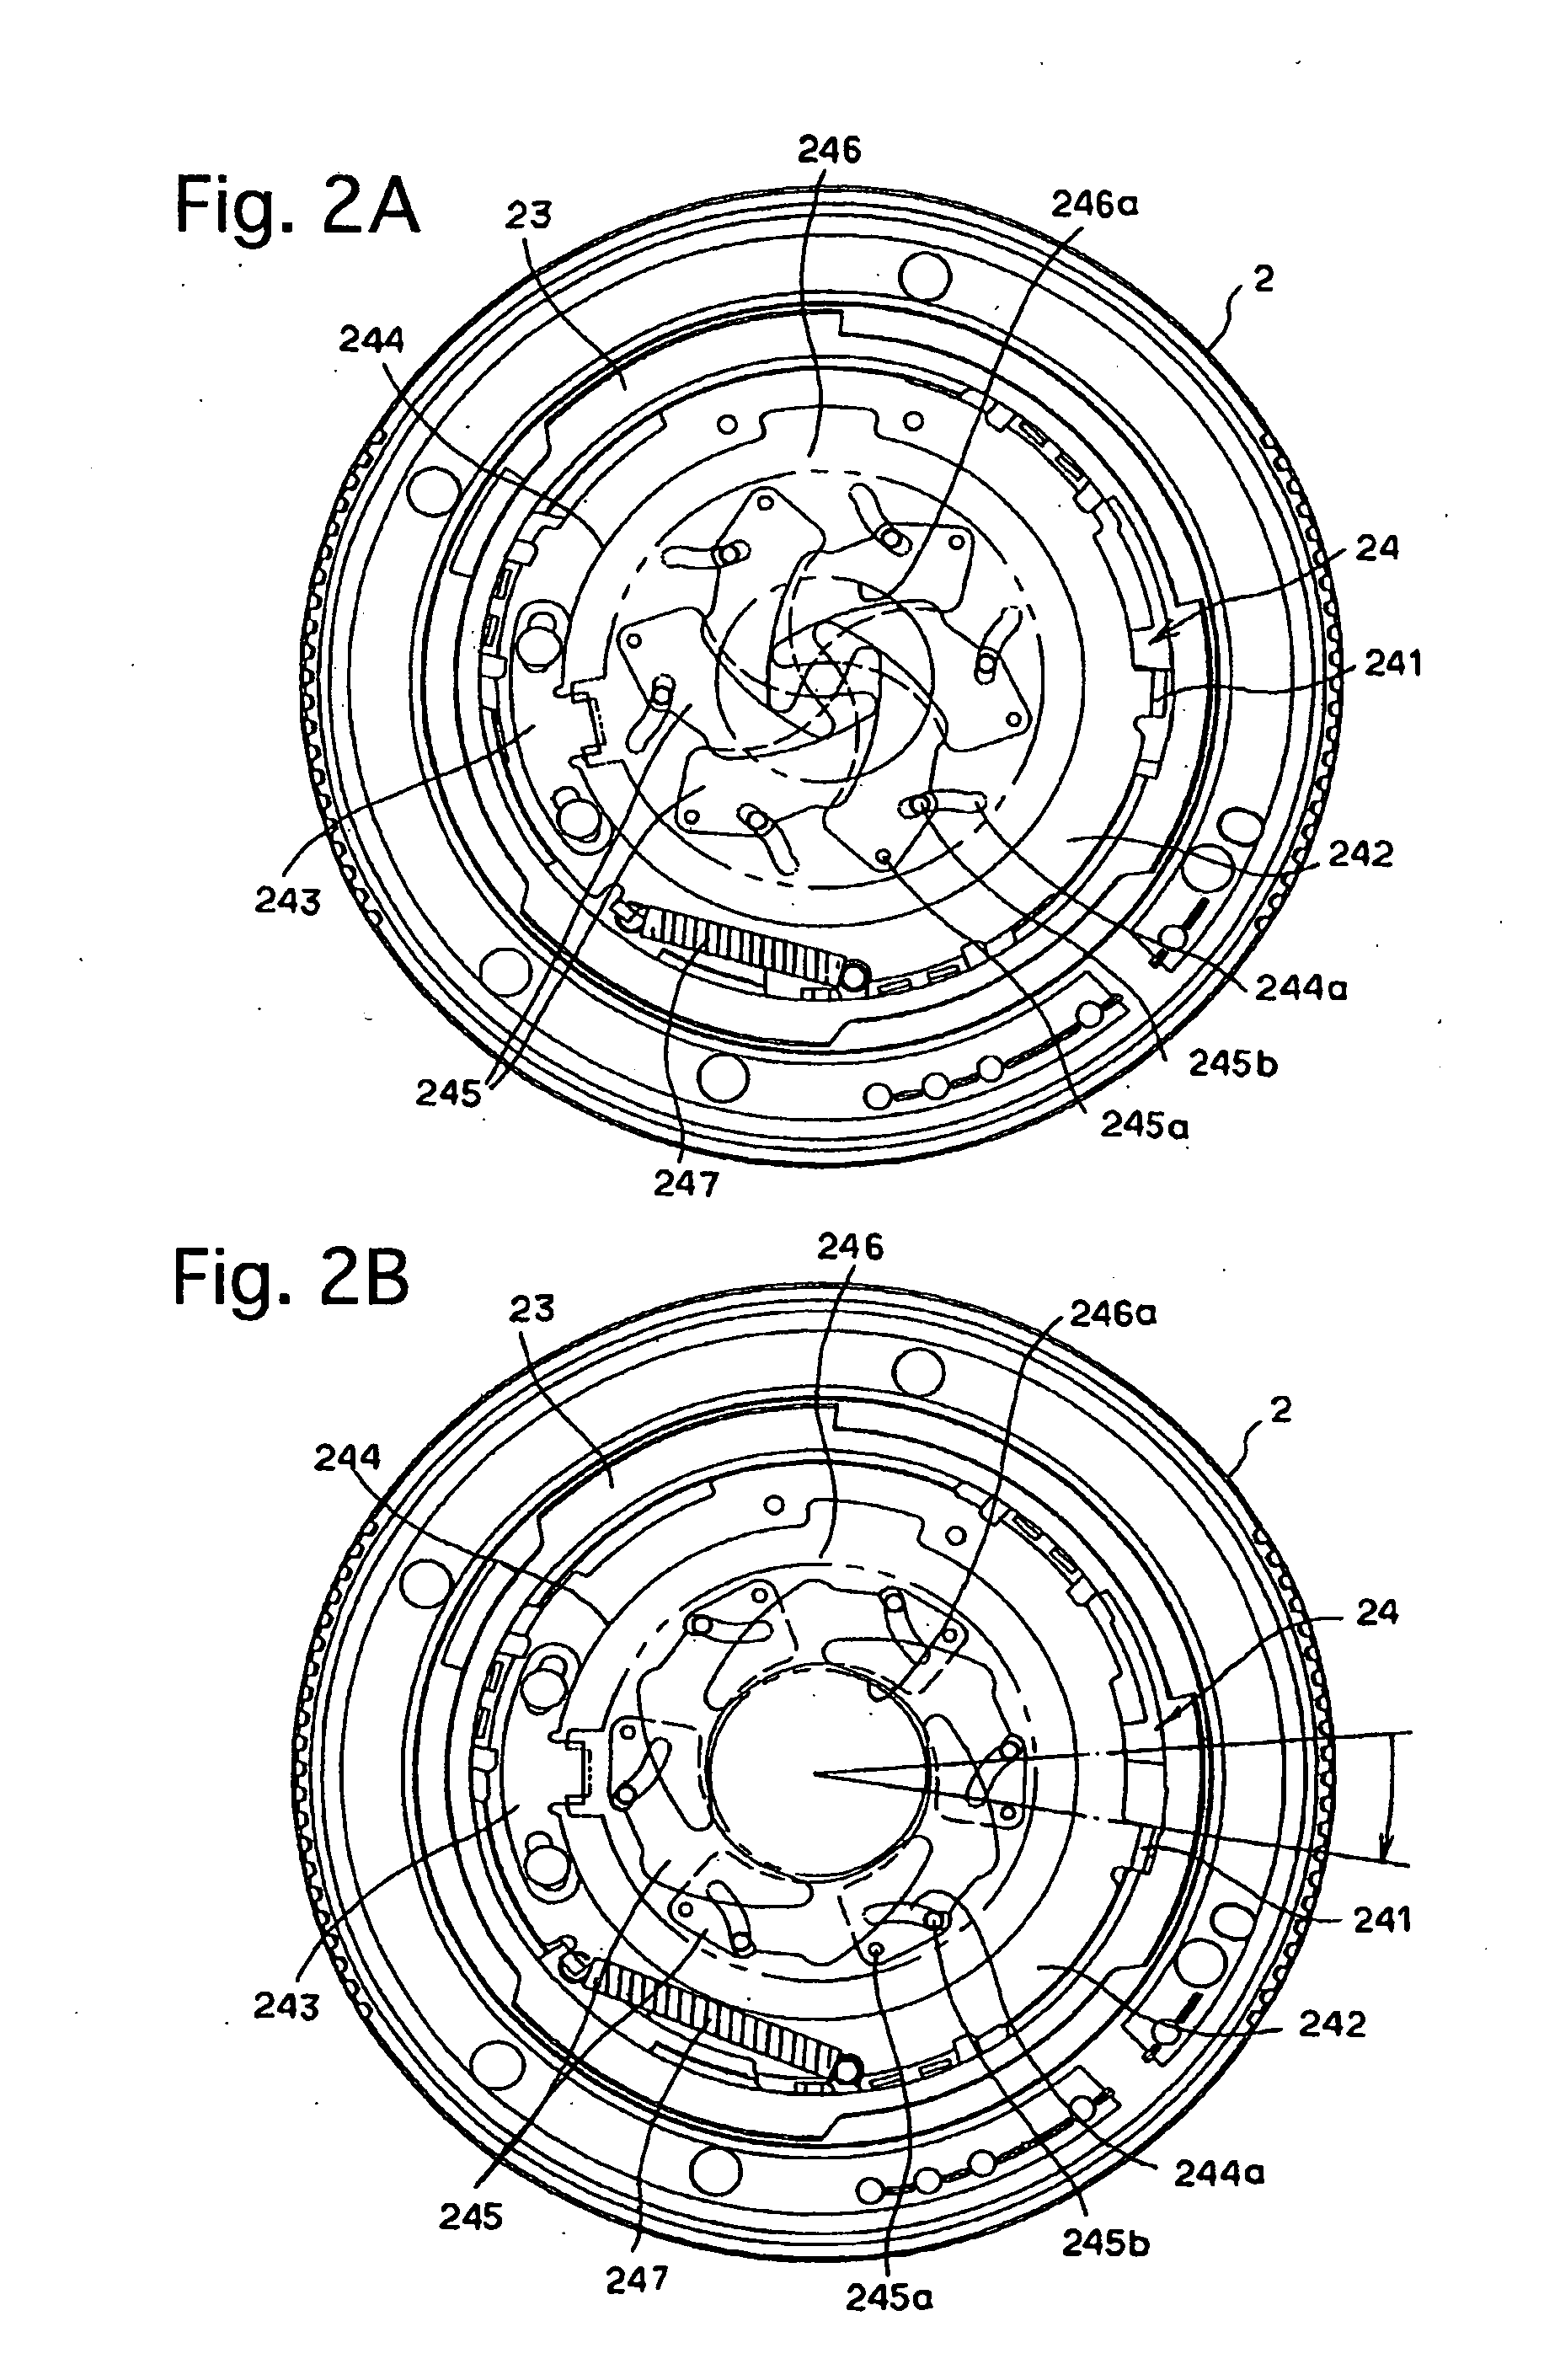 Diaphragm driving device of a camera system using an interchangeable lens